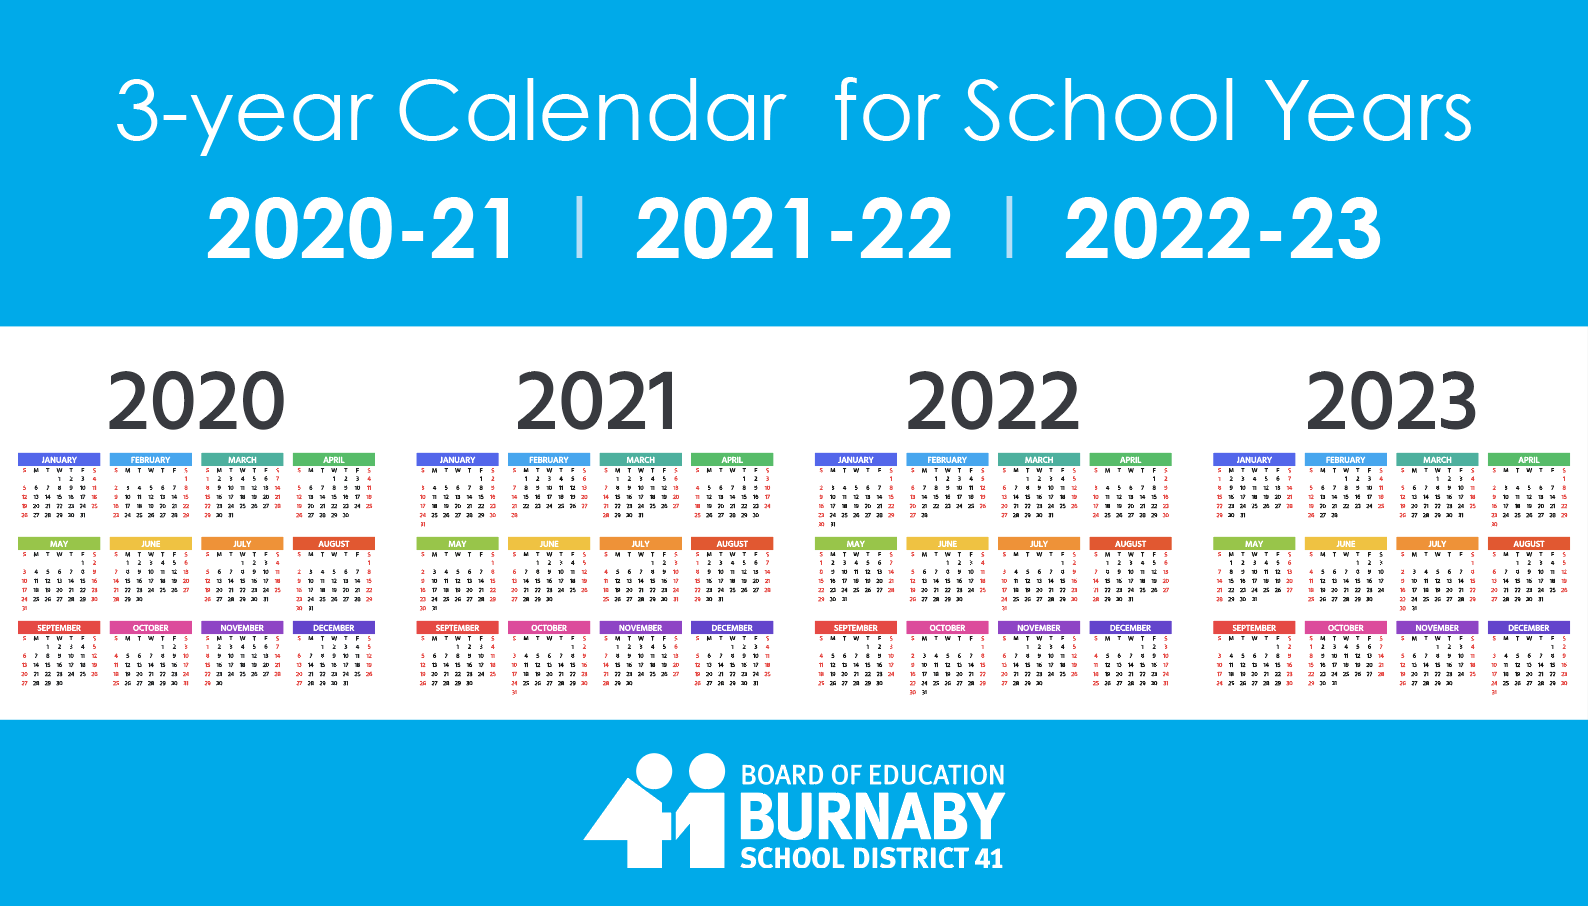 3-yearcalendar-2019-12-02-at-1-12-44-pm-burnaby-schools